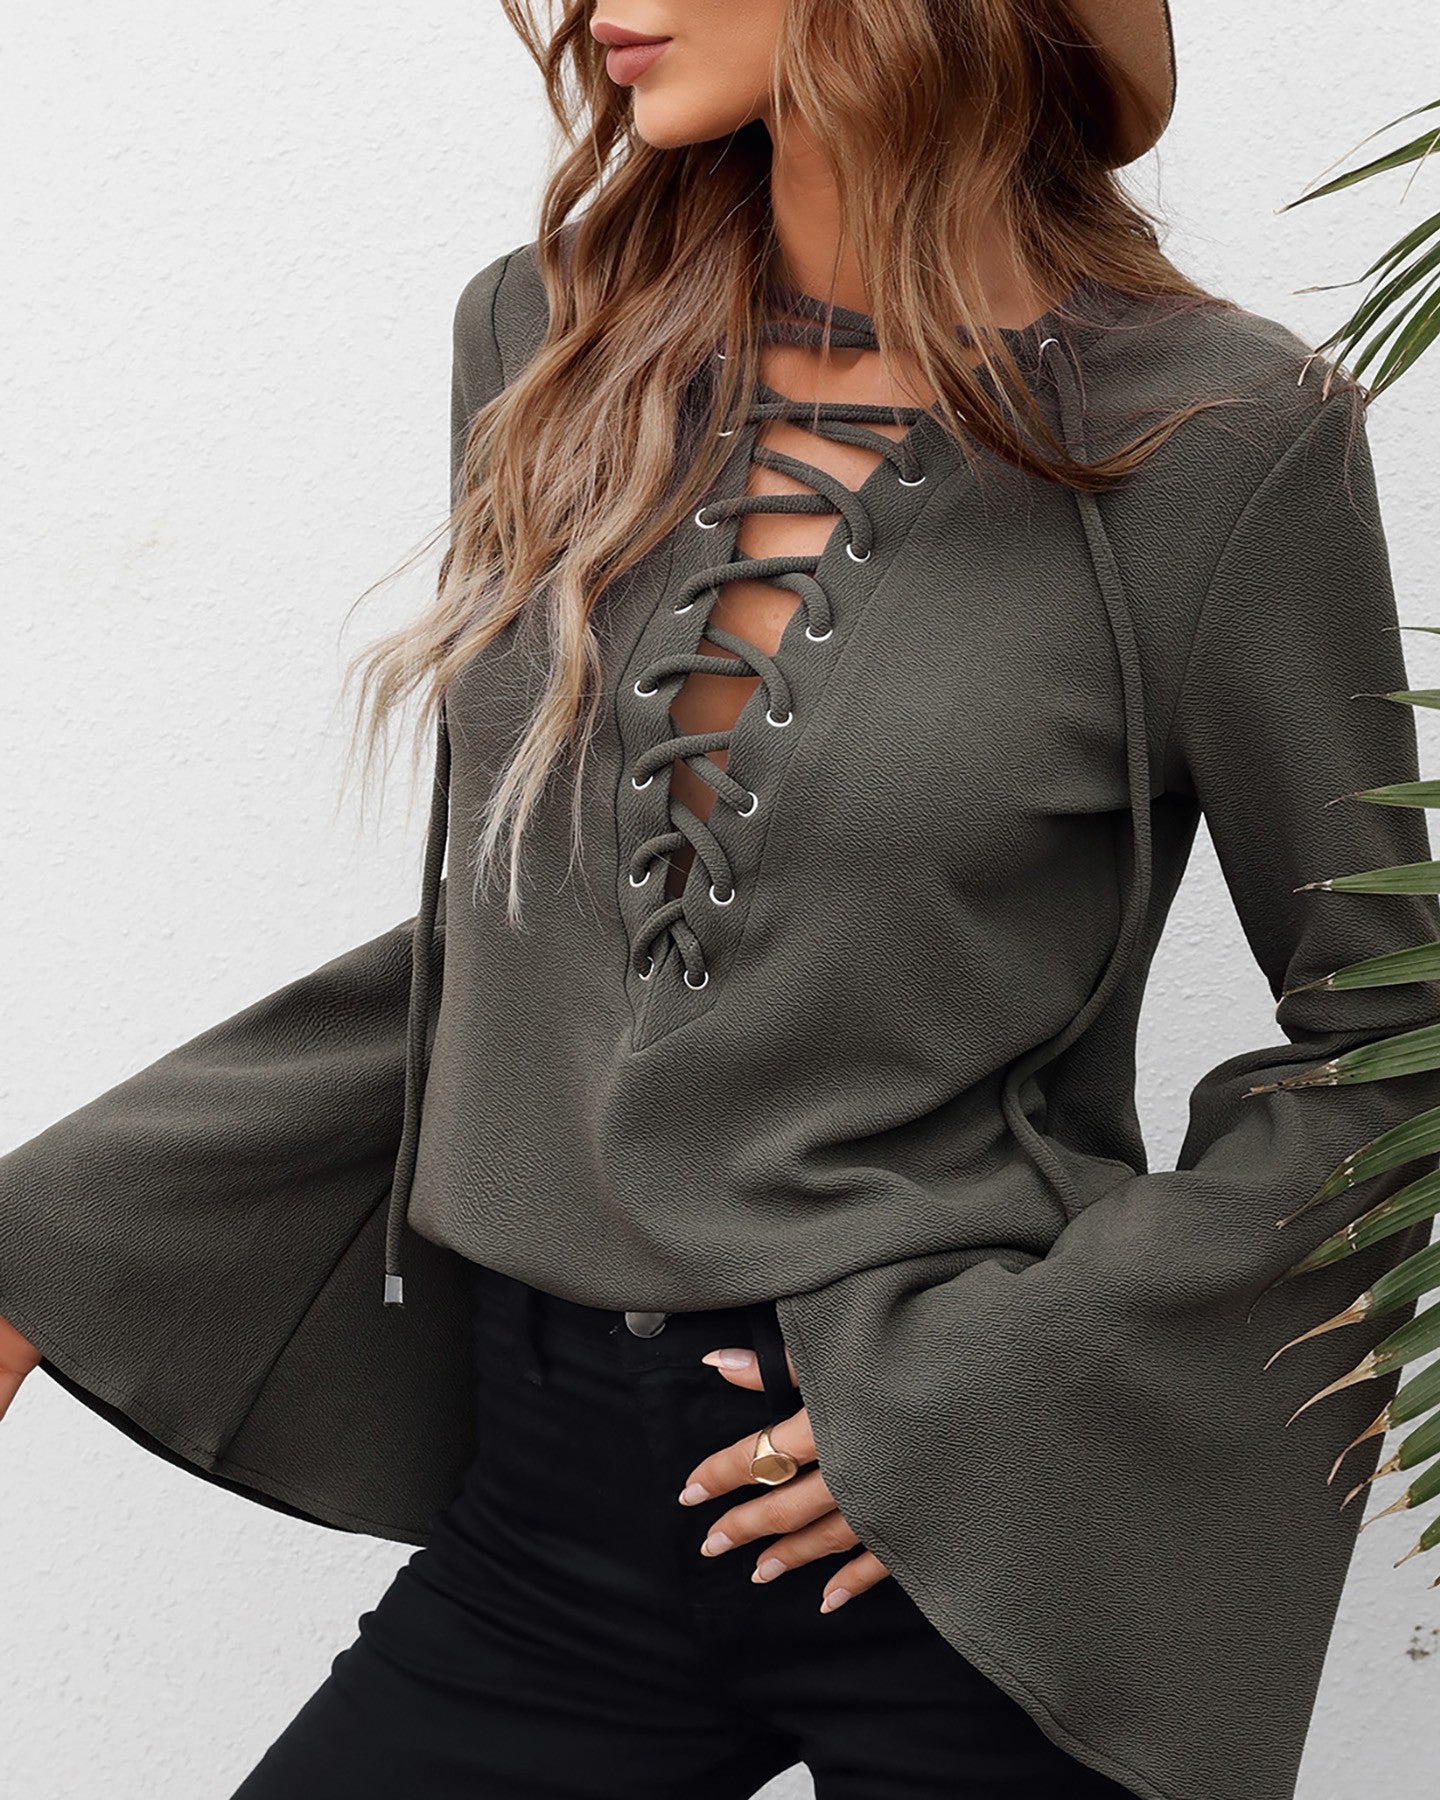 Eyelet Lace Up Bell Sleeve Casual Top